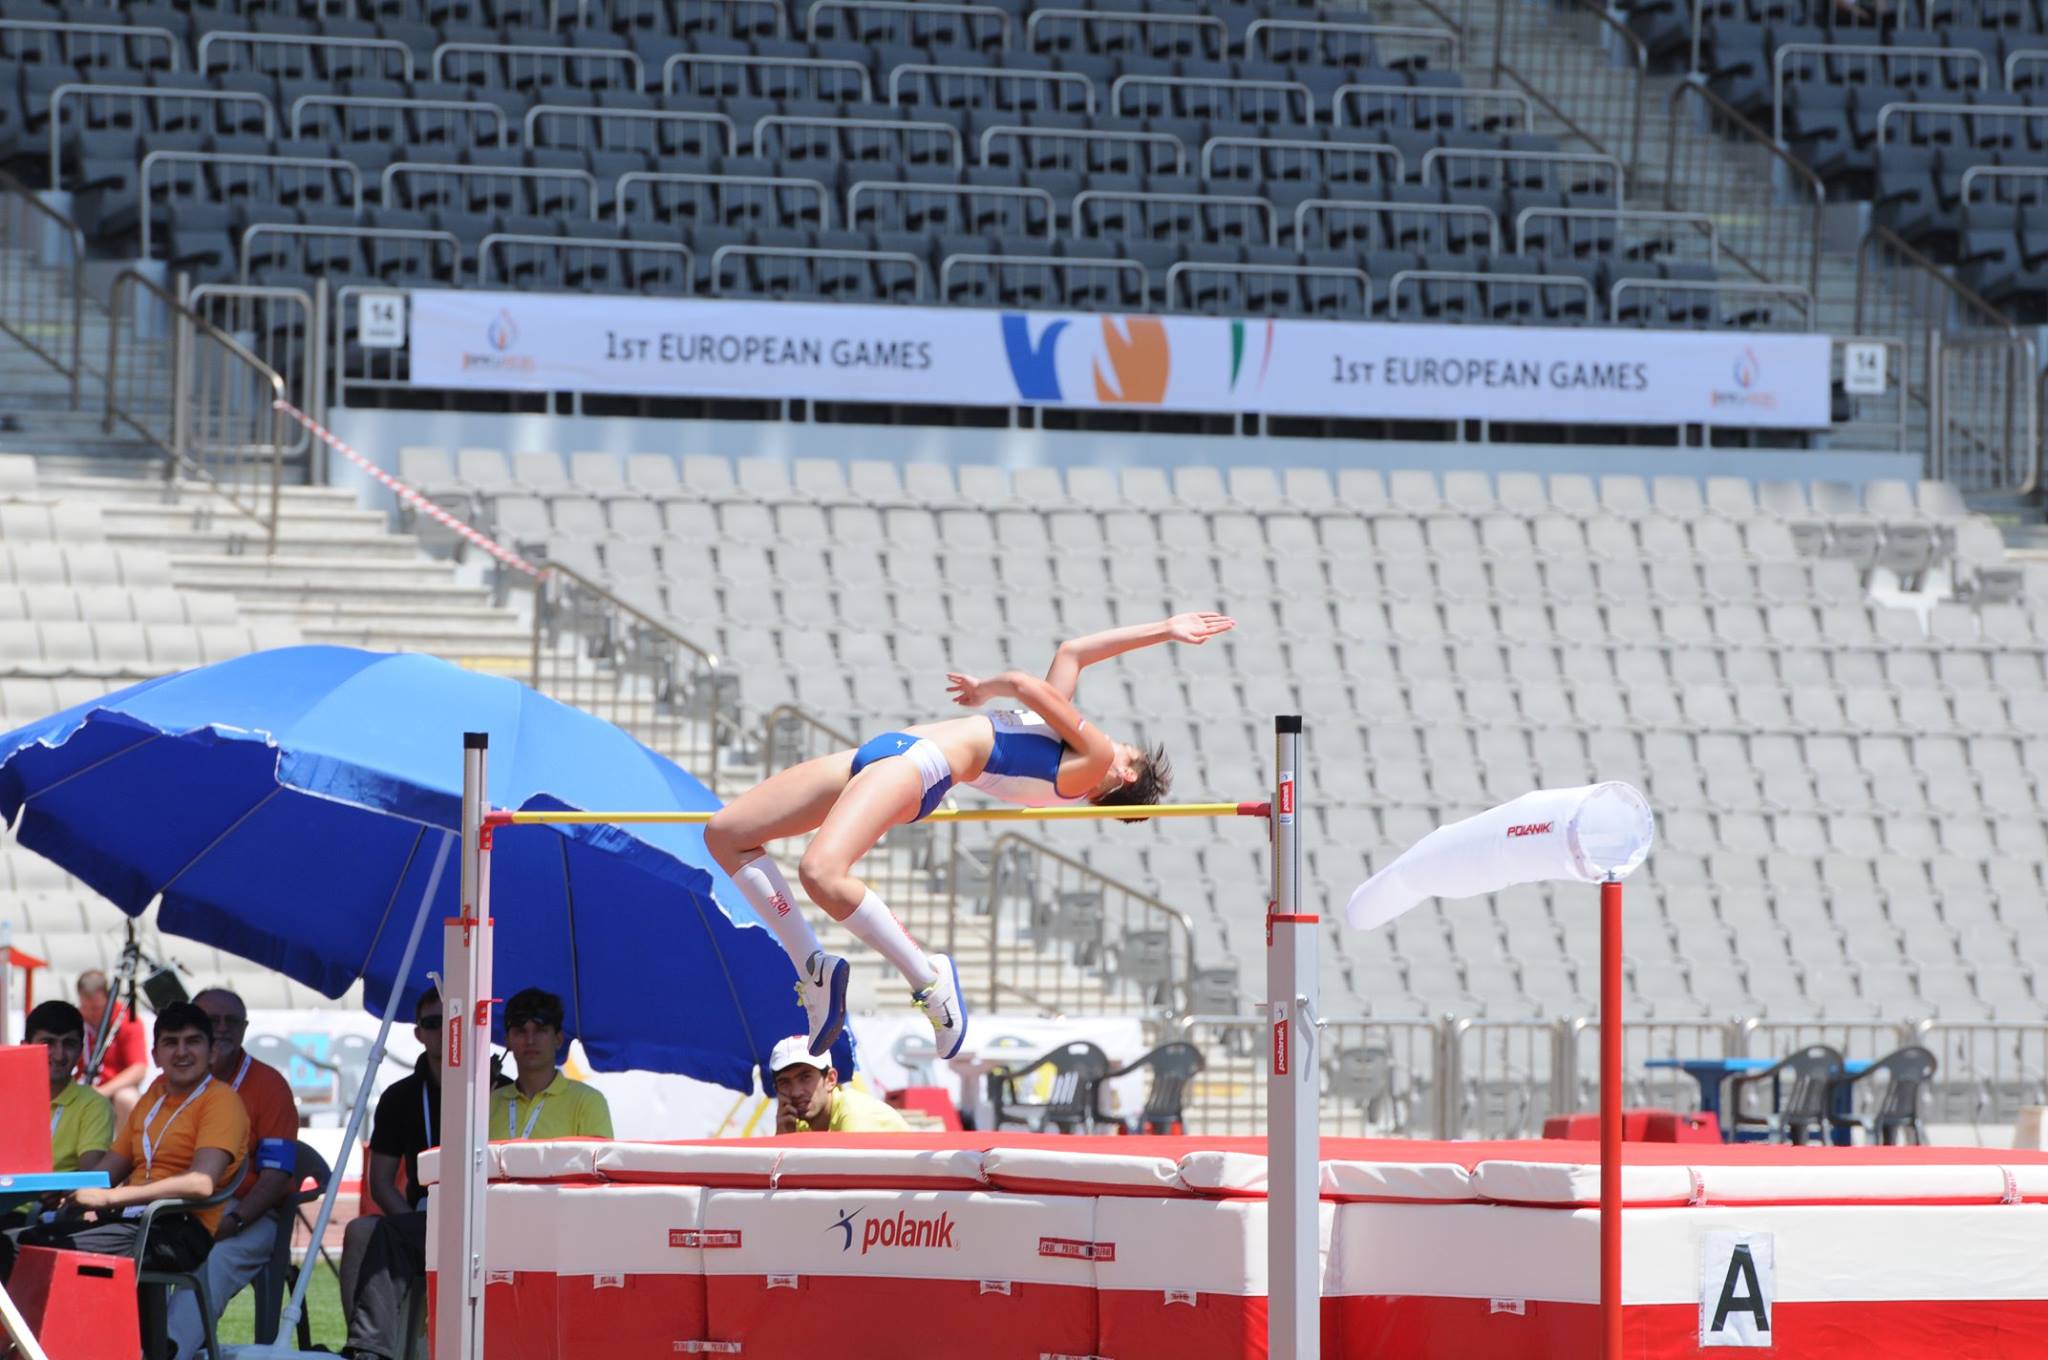 There was a high standard of competition in events during the European Youth Olympic Trials in Baku, including the women's high jump ©Baku 2015